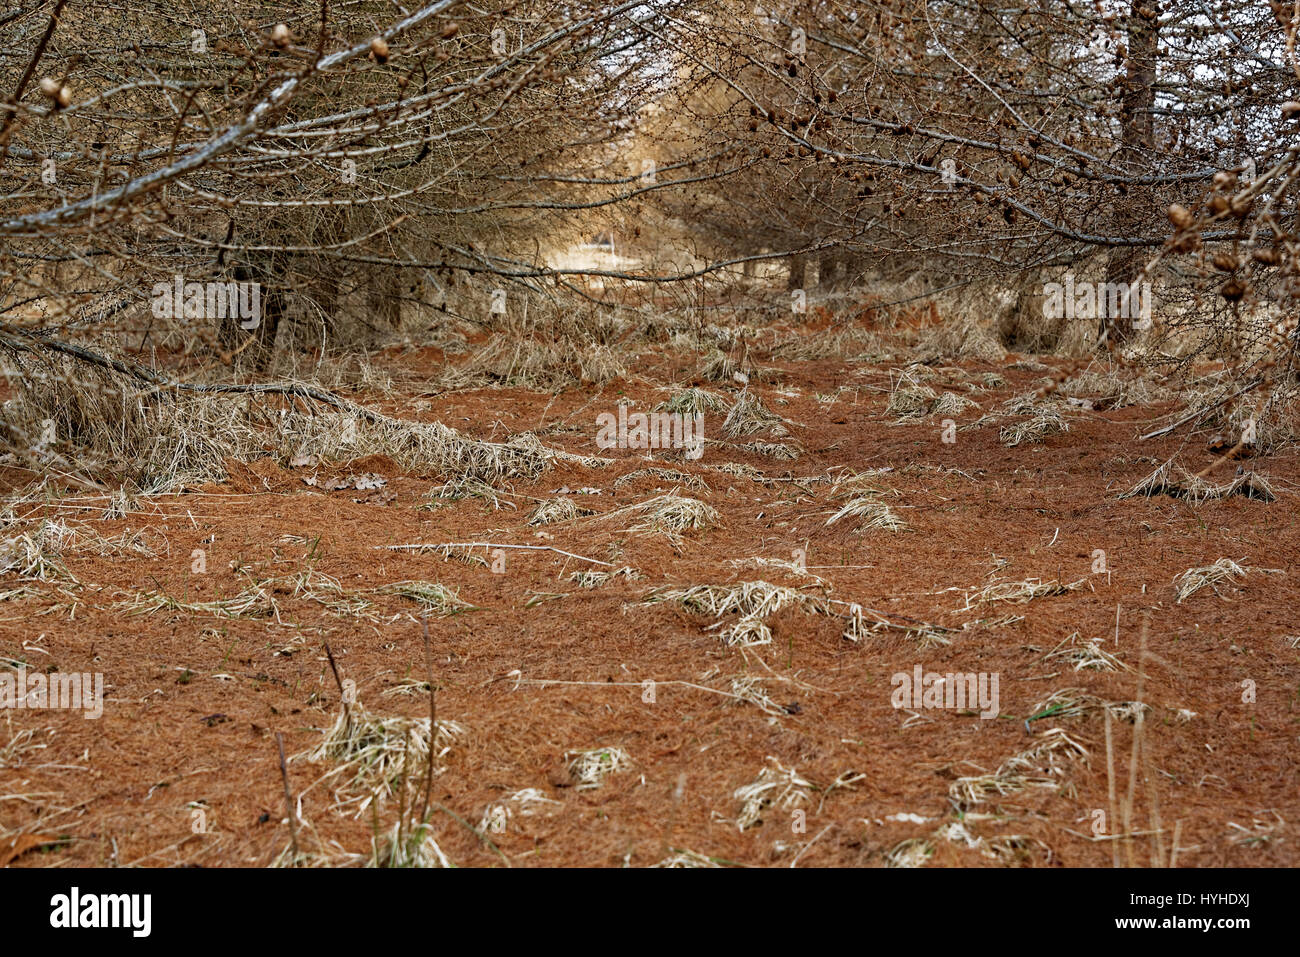 Larch needle landscape under larch forest in early spring Stock Photo